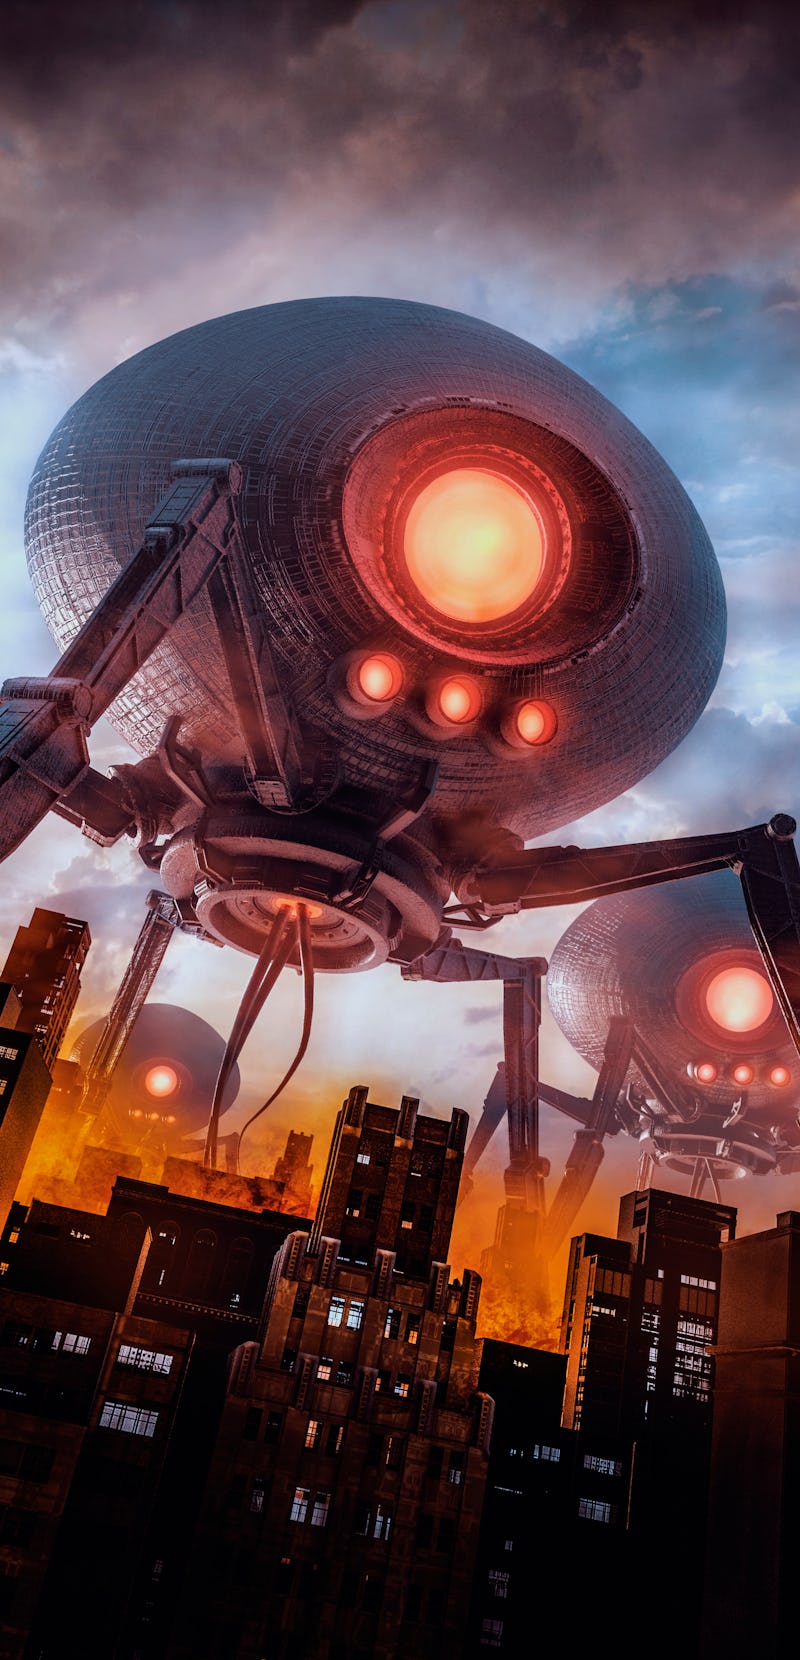 The eve of invasion / 3D illustration of retro science fiction scene with giant alien machines attac...